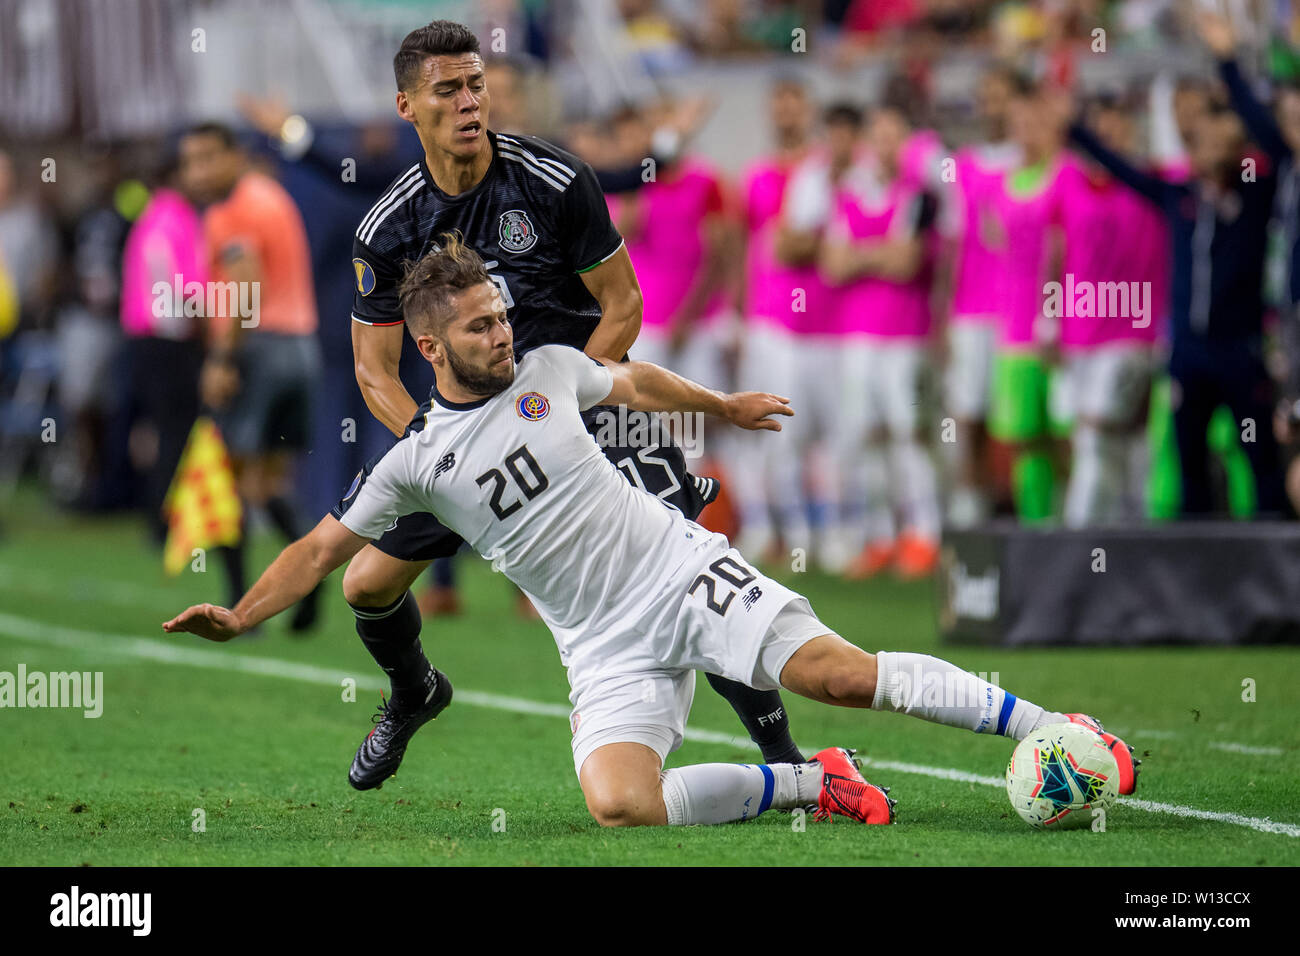 June 29, 2019: Costa Rica midfielder Elias Aguilar (20) keeps the ball in bounds in front of Mexico defender Hector Moreno (15) during the extra time period of a CONCACAF Gold Cup quarterfinals soccer match between Costa Rica and Mexico at NRG Stadium in Houston, TX. Mexico won on penalty kicks 1-1 (5-4).Trask Smith/CSM Stock Photo